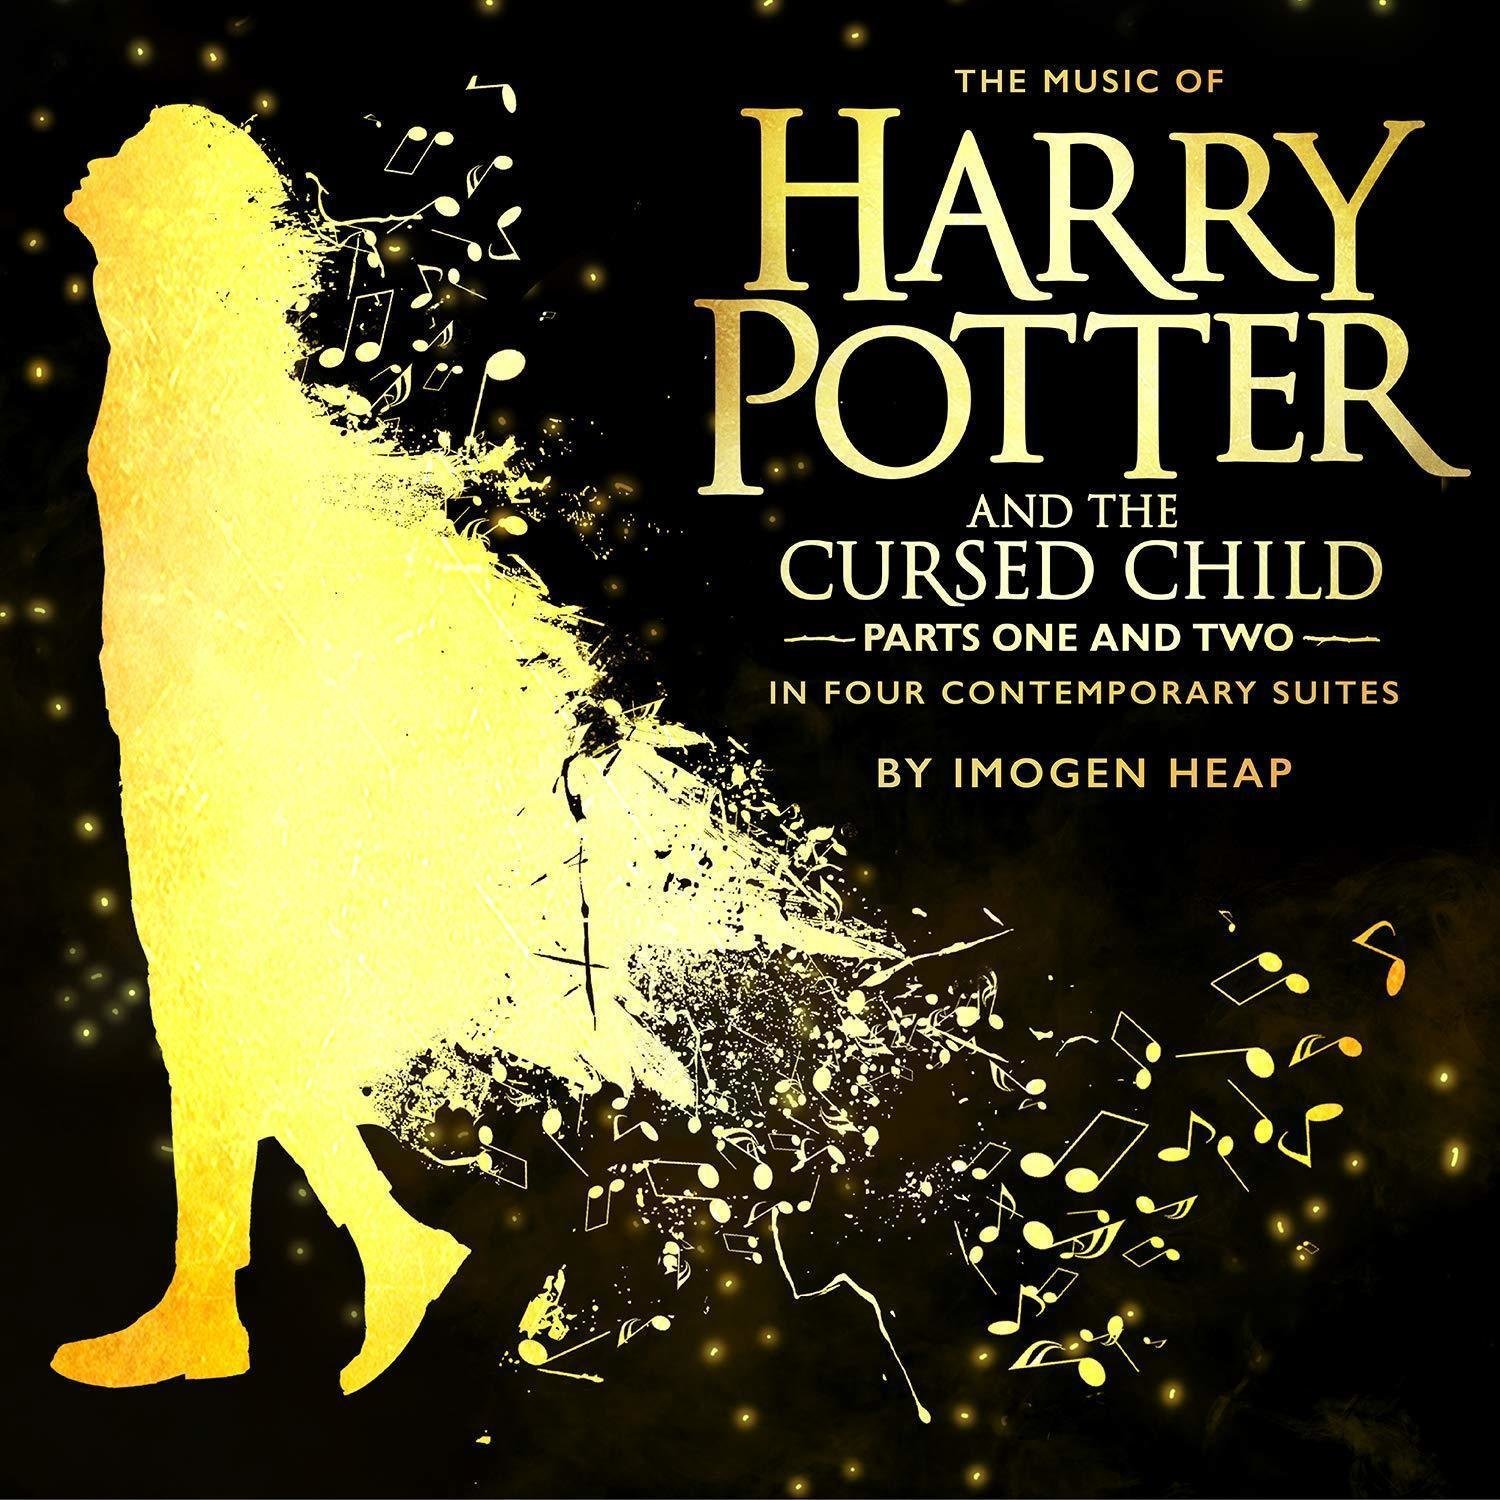 Disco de vinil Imogen Heap Music of Harry Potter and the Cursed Child - In Four Contemporary Suites (2 LP)